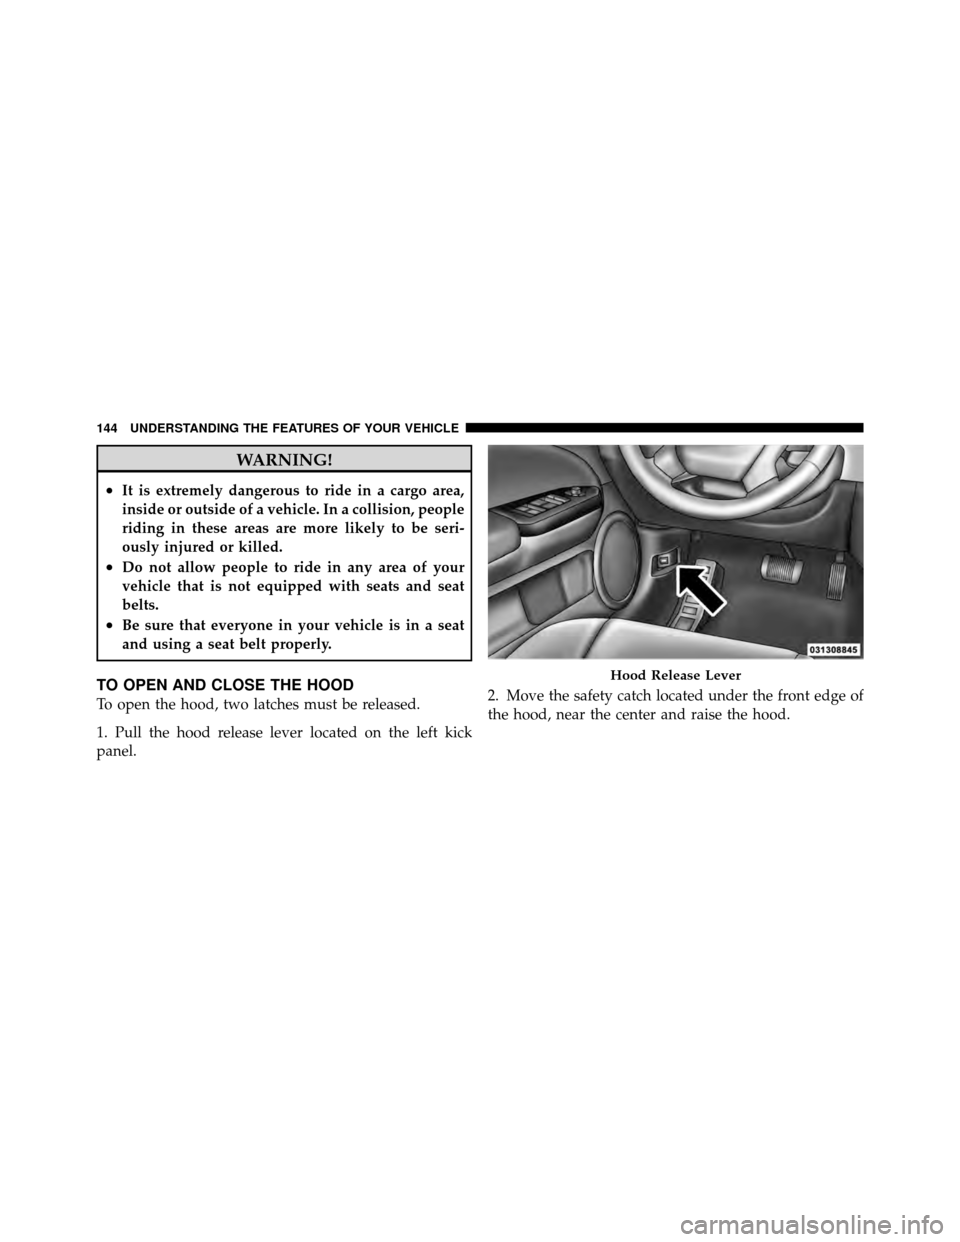 DODGE CALIBER 2010 1.G Owners Manual WARNING!
•It is extremely dangerous to ride in a cargo area,
inside or outside of a vehicle. In a collision, people
riding in these areas are more likely to be seri-
ously injured or killed.
•Do n